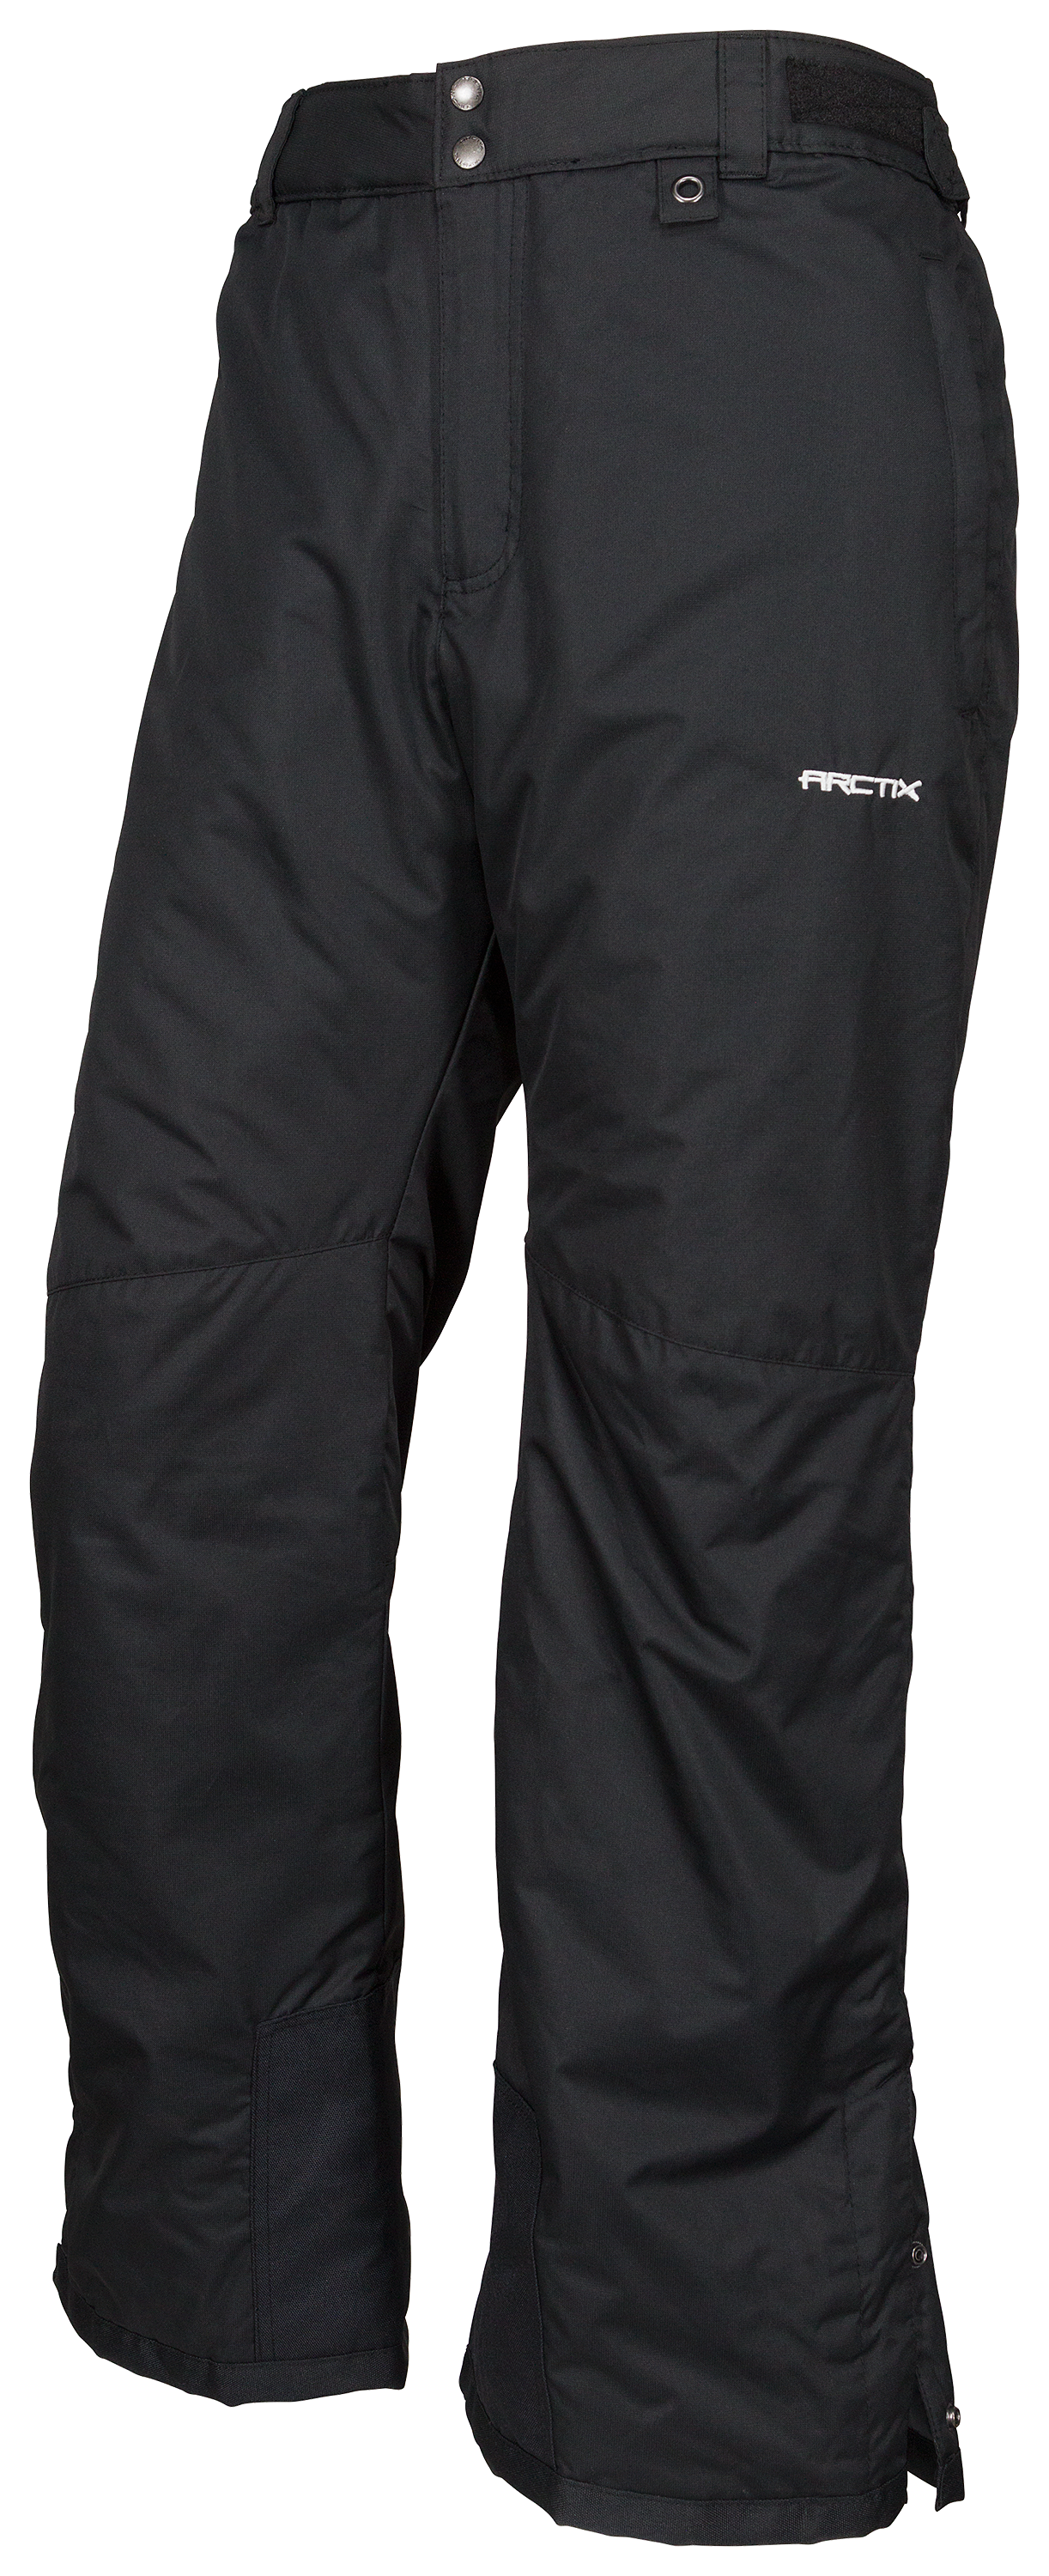 Arctix Men's Essential Snow Pants in Black XX-Large - BRAND NEW WITH TAGS 